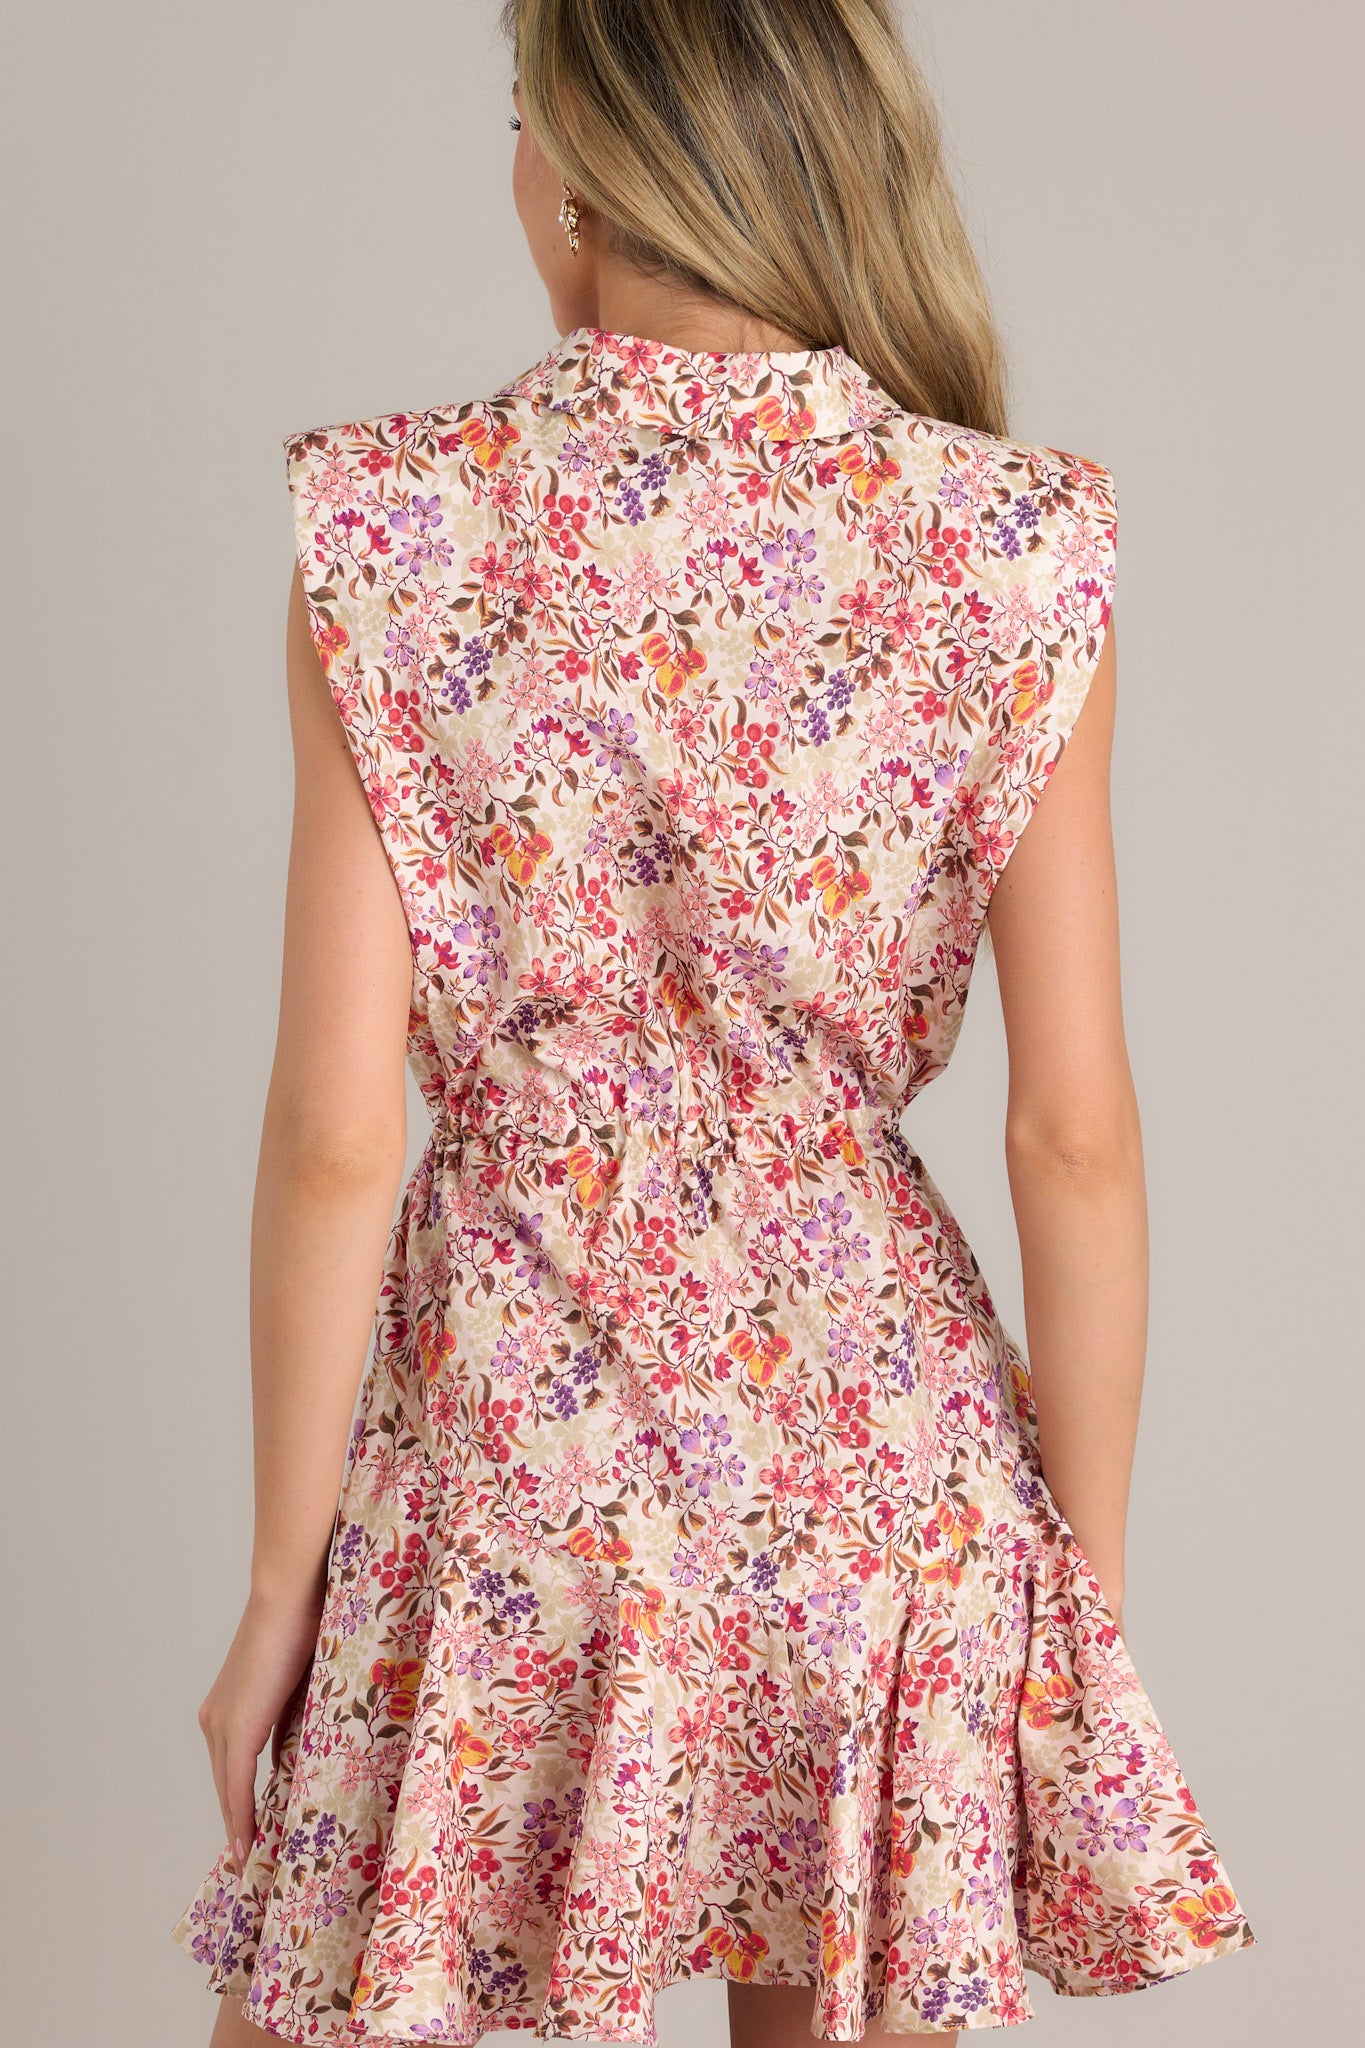 Back view of the beige floral multi mini dress featuring sleeveless padded shoulders, a collared neckline, and a flowy ruffled skirt with an elastic waist accentuated with tassels.